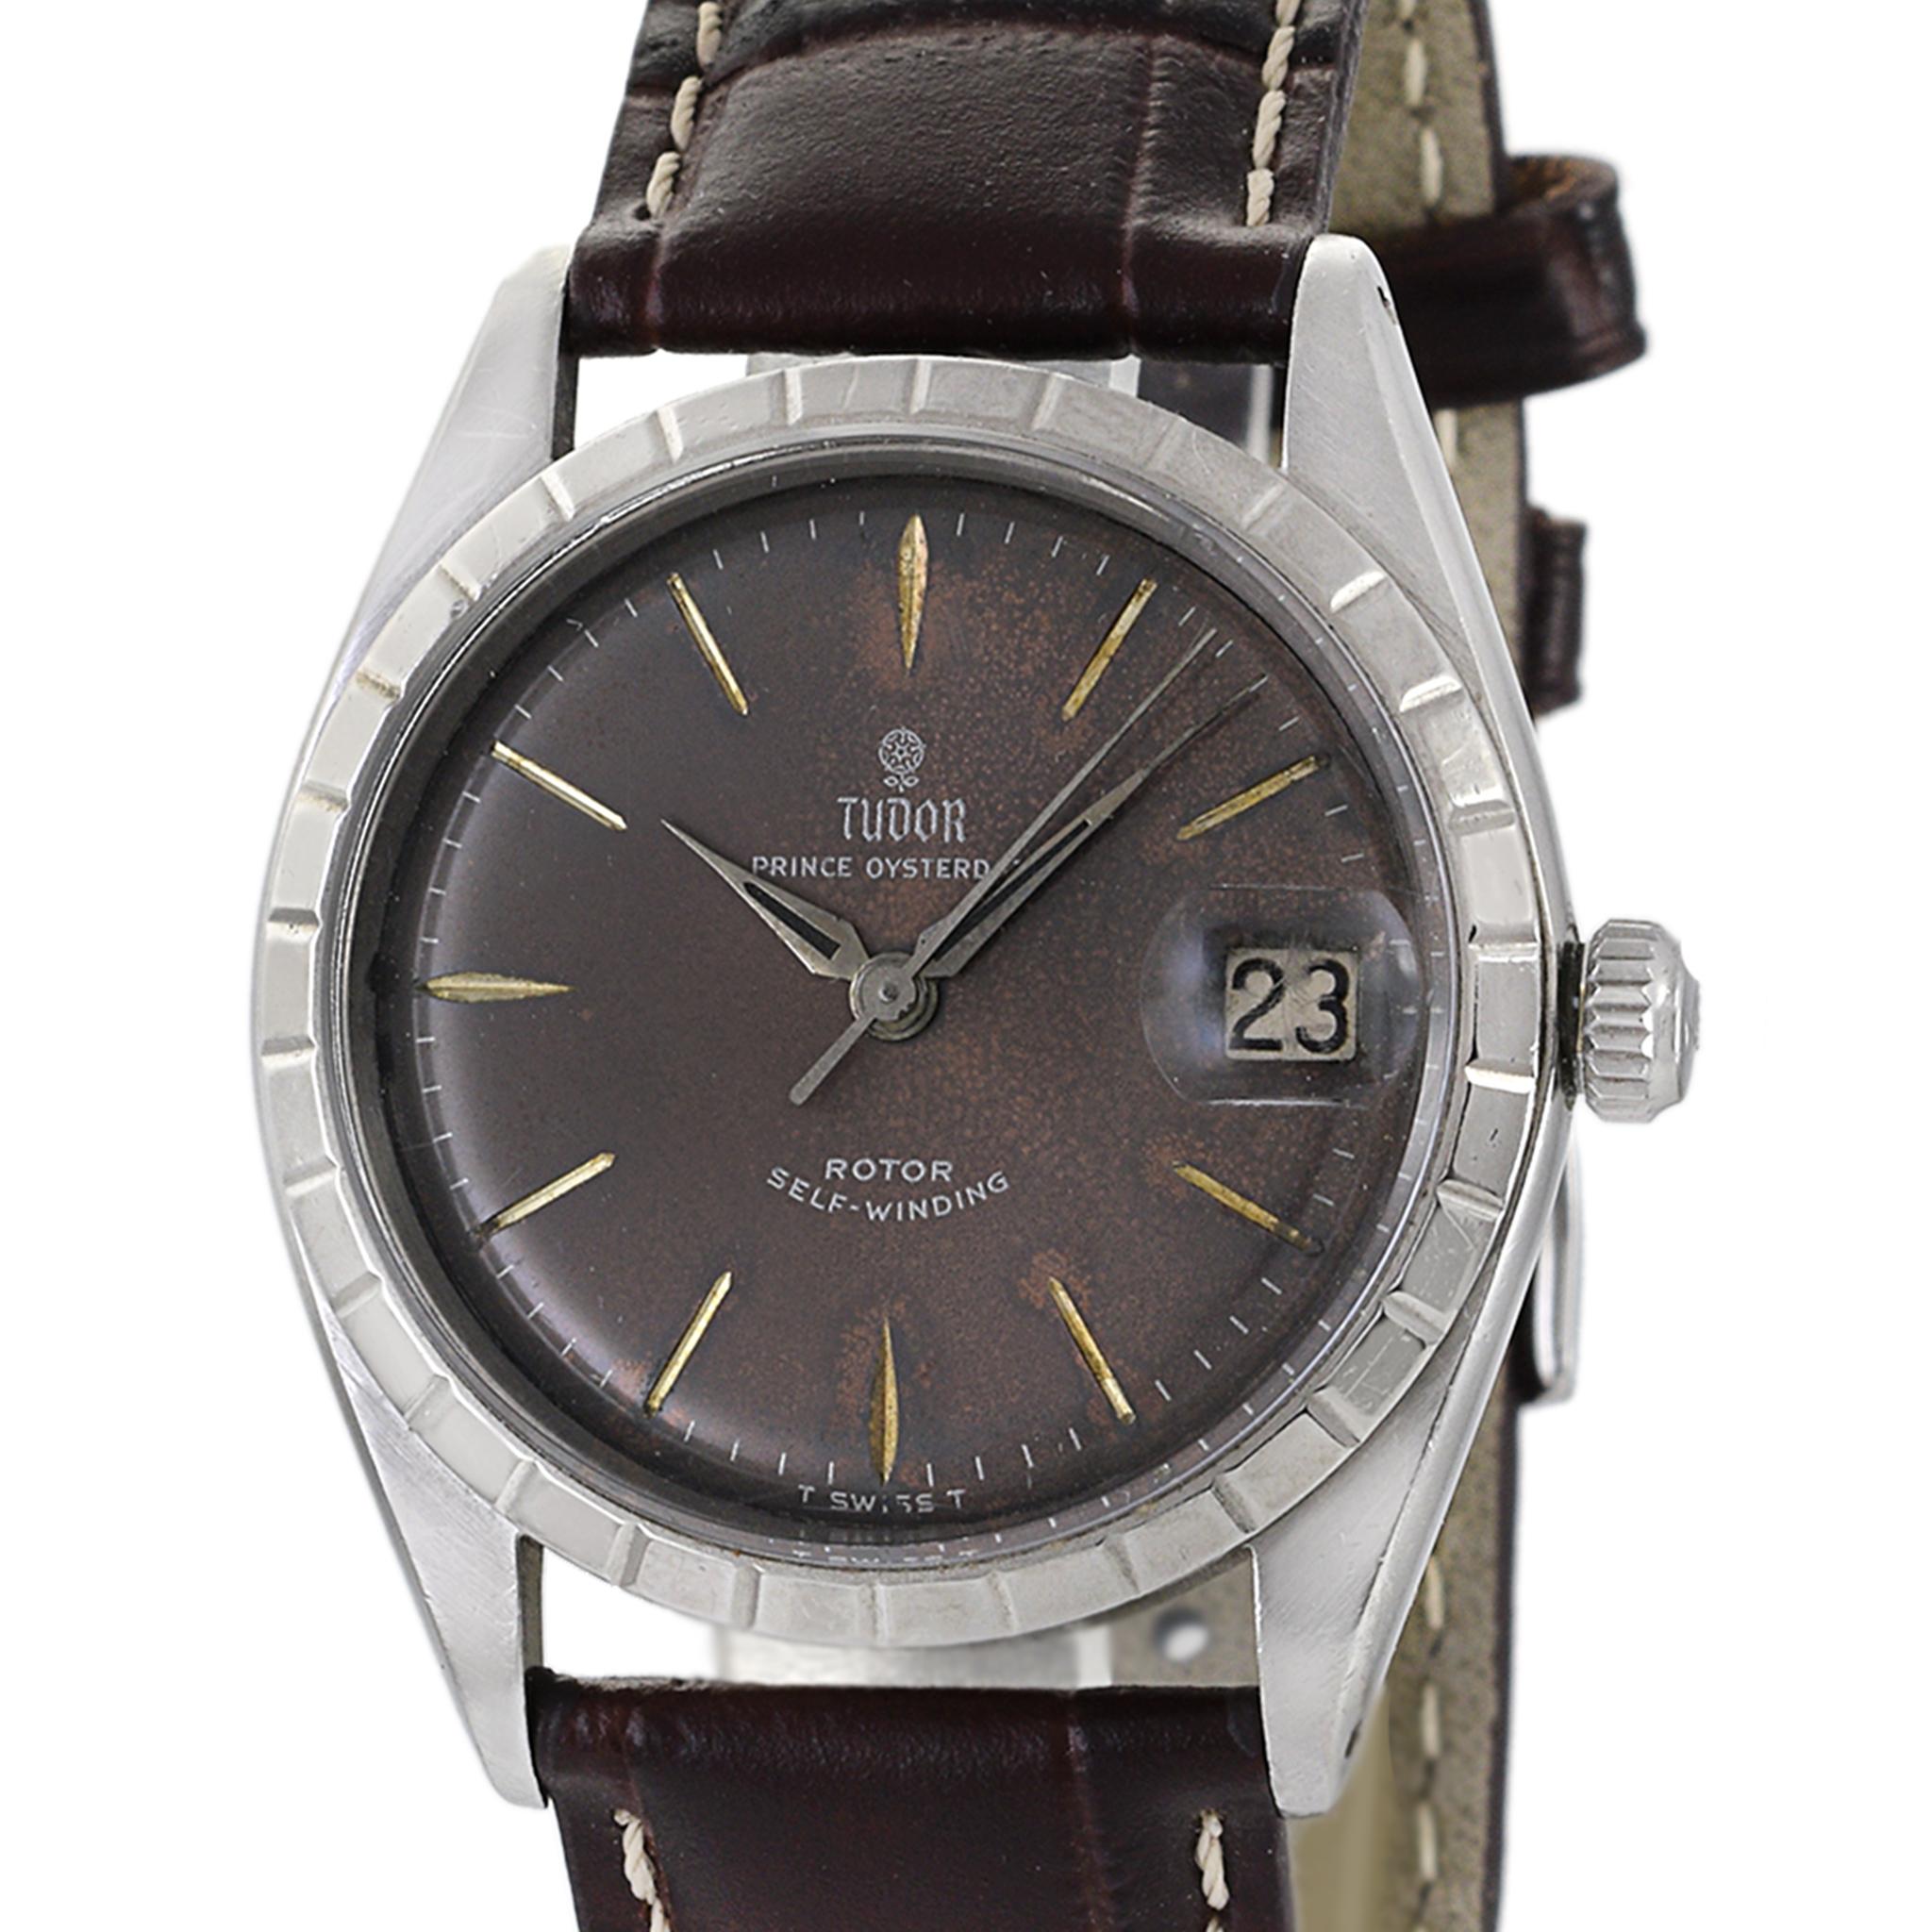 Tudor Prince Oysterdate Reference 7966 In Good Condition For Sale In New York, NY